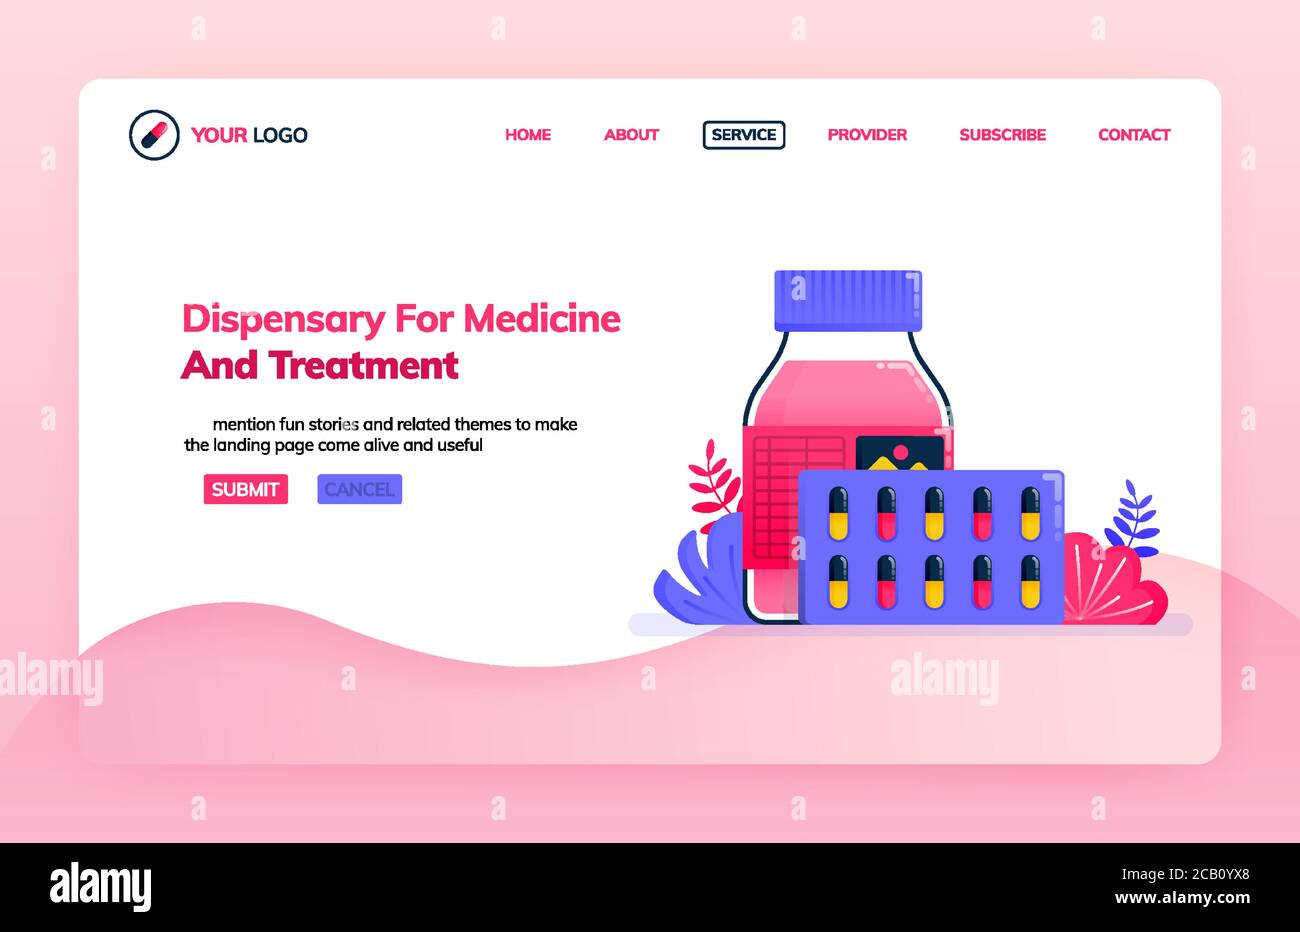 Landing page illustration template of dispensary for medicine and treatment. Drugs for health services. Health themes. Can be used for landing page, w Stock Vector